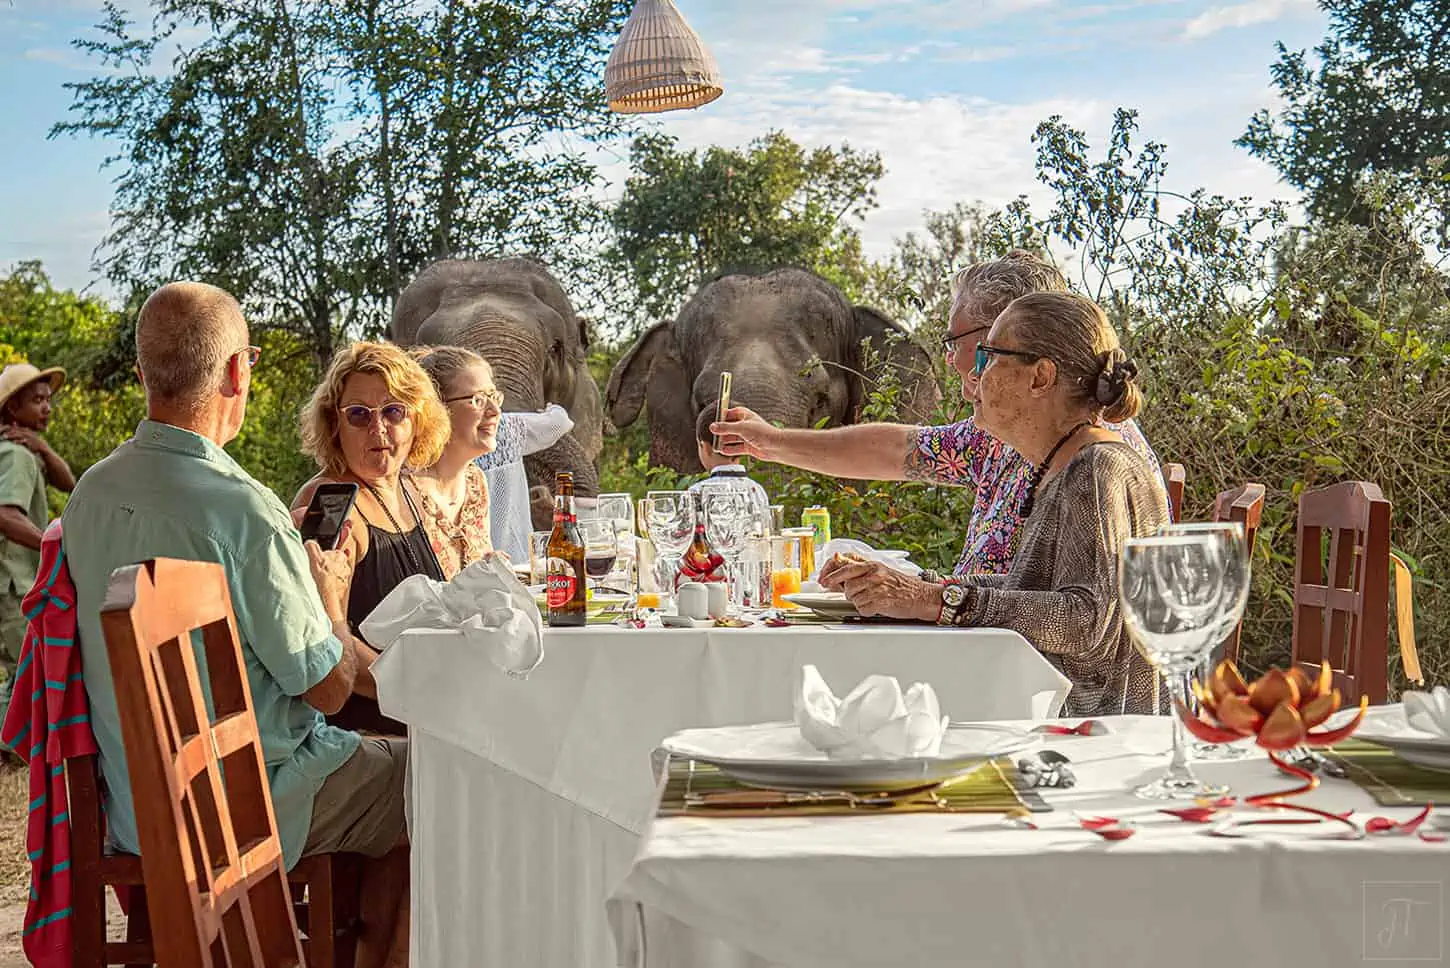 people dining with an elephant